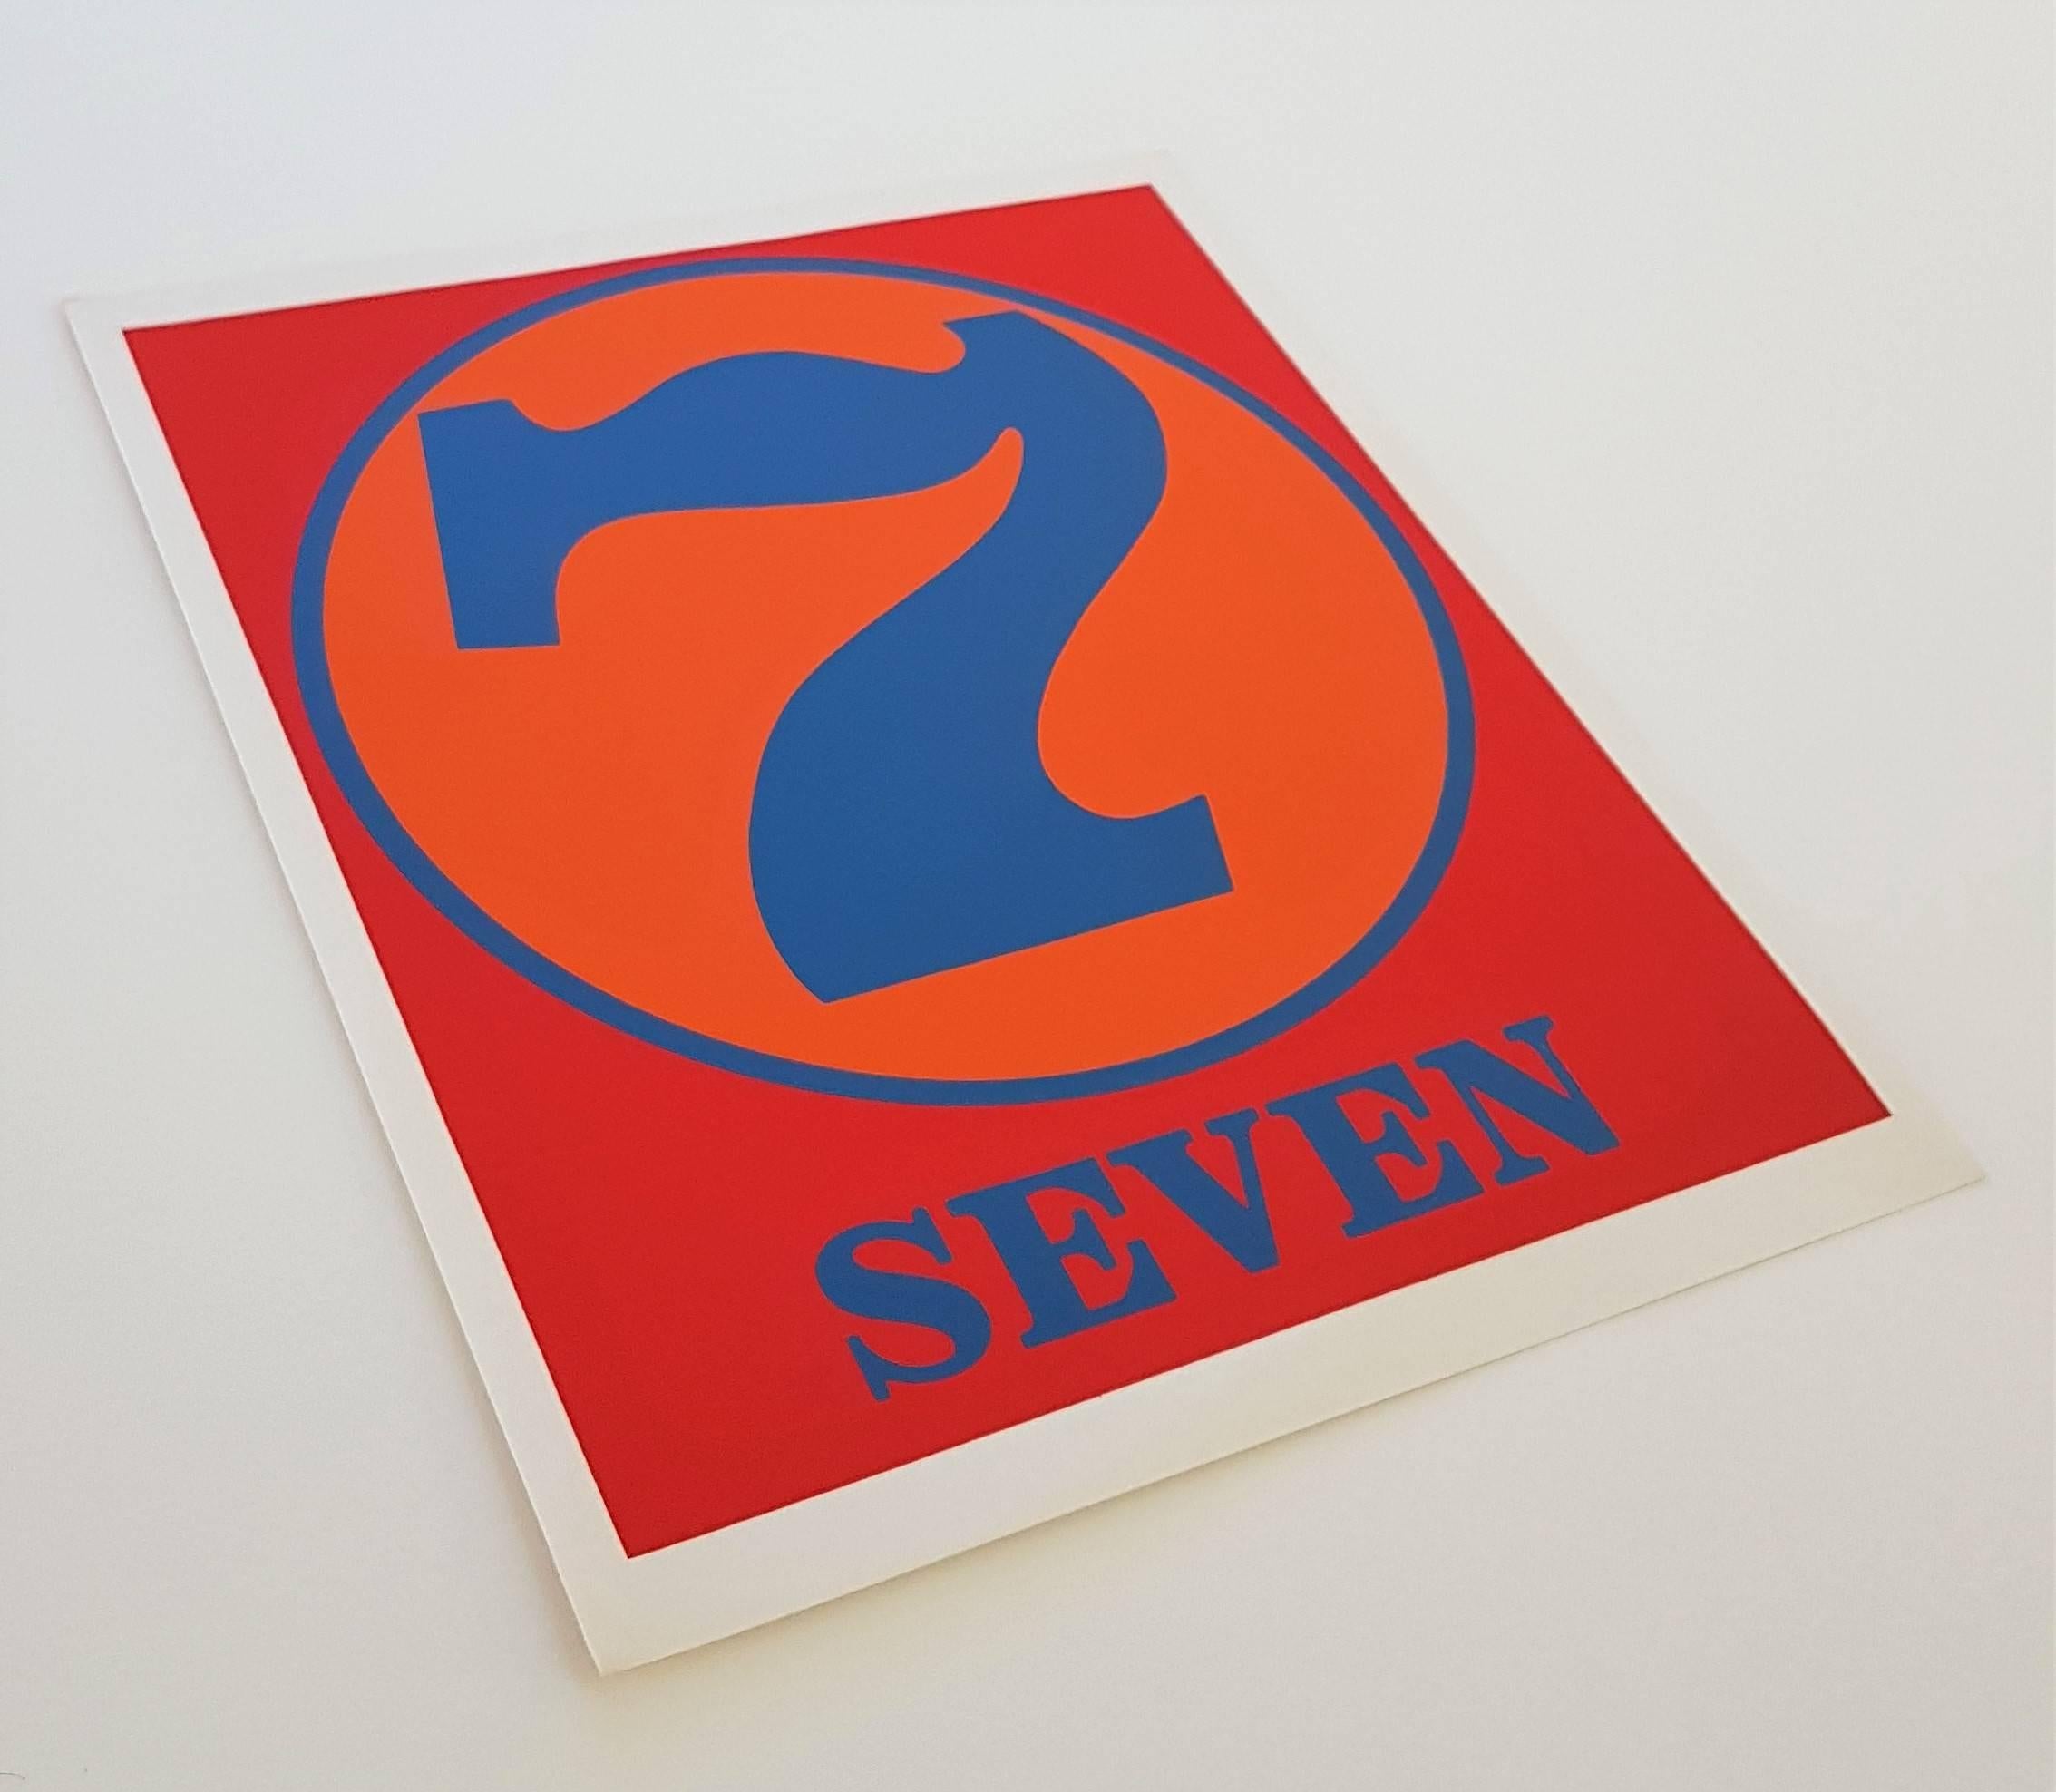 Number Suite - Seven - Print by Robert Indiana